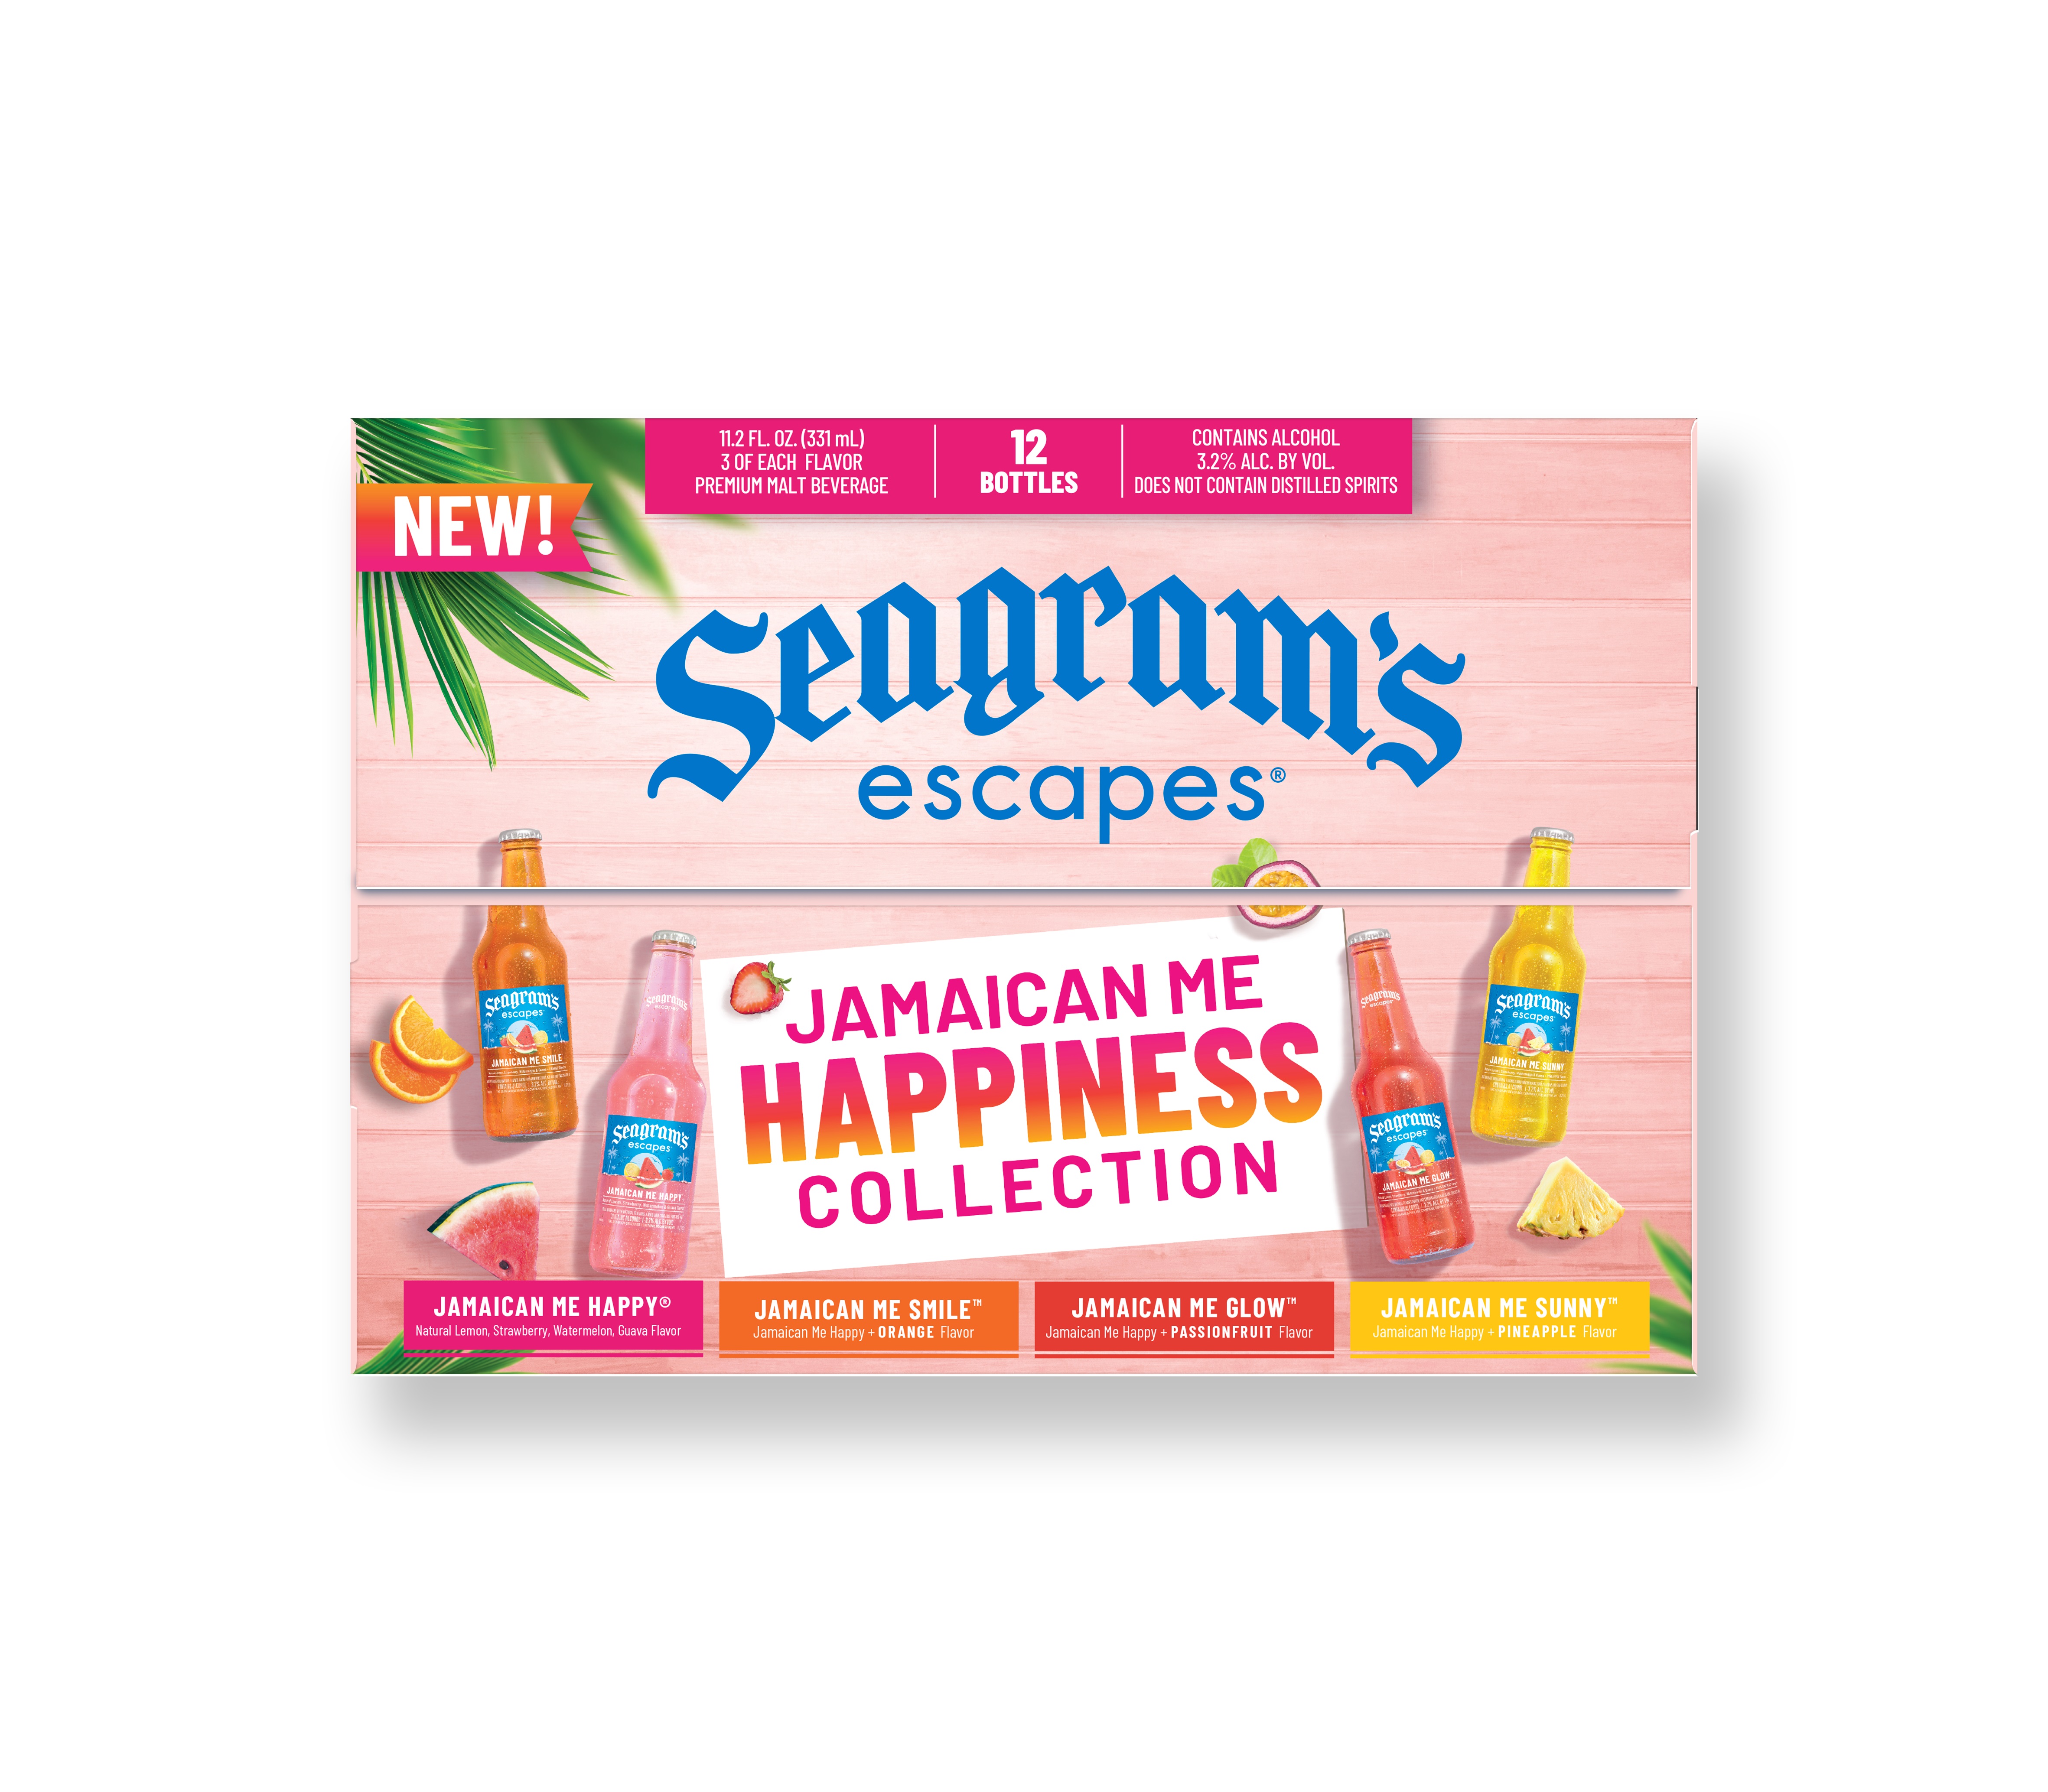 Seagram's Escapes Jamaican Me Happiness Collection, Flavored Malt Beverage, 12 pack, 11.2 fl oz Glass Bottles, 3.2% ABV - image 4 of 4